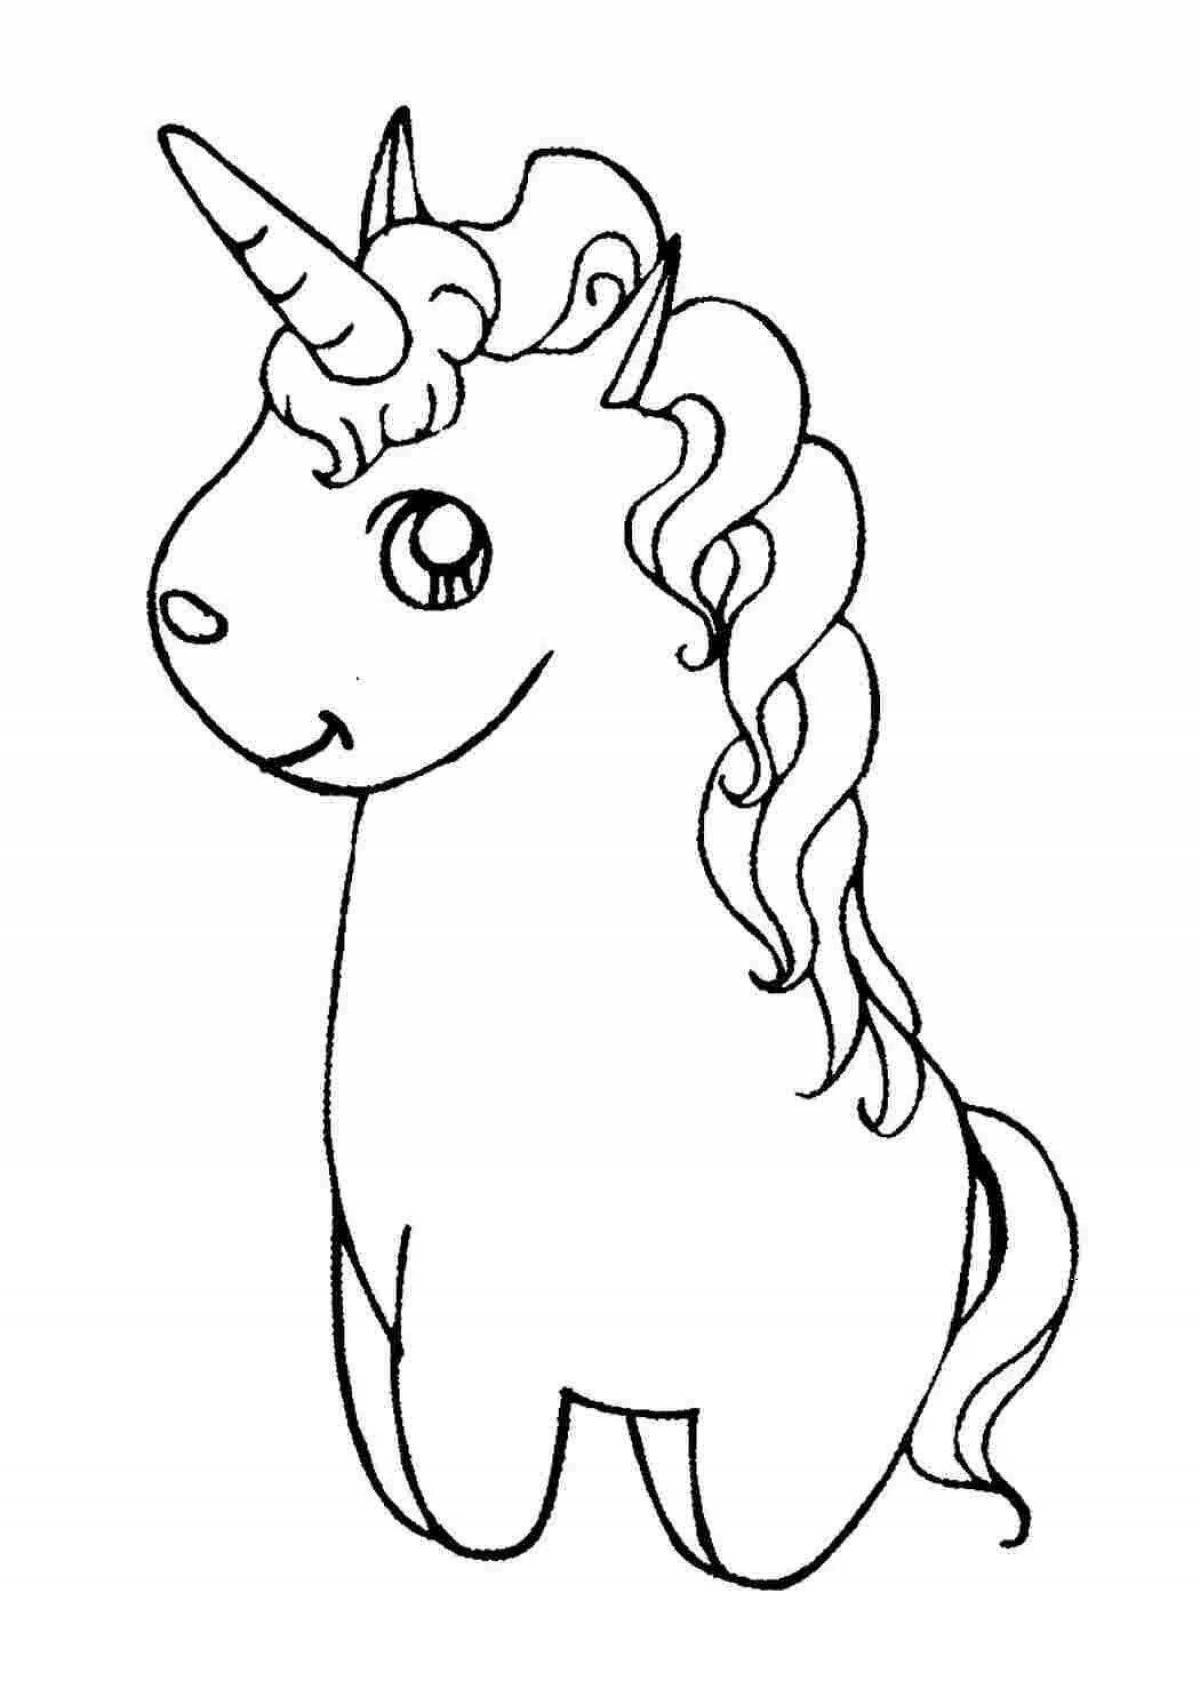 Unicorn live coloring for kids 3 4